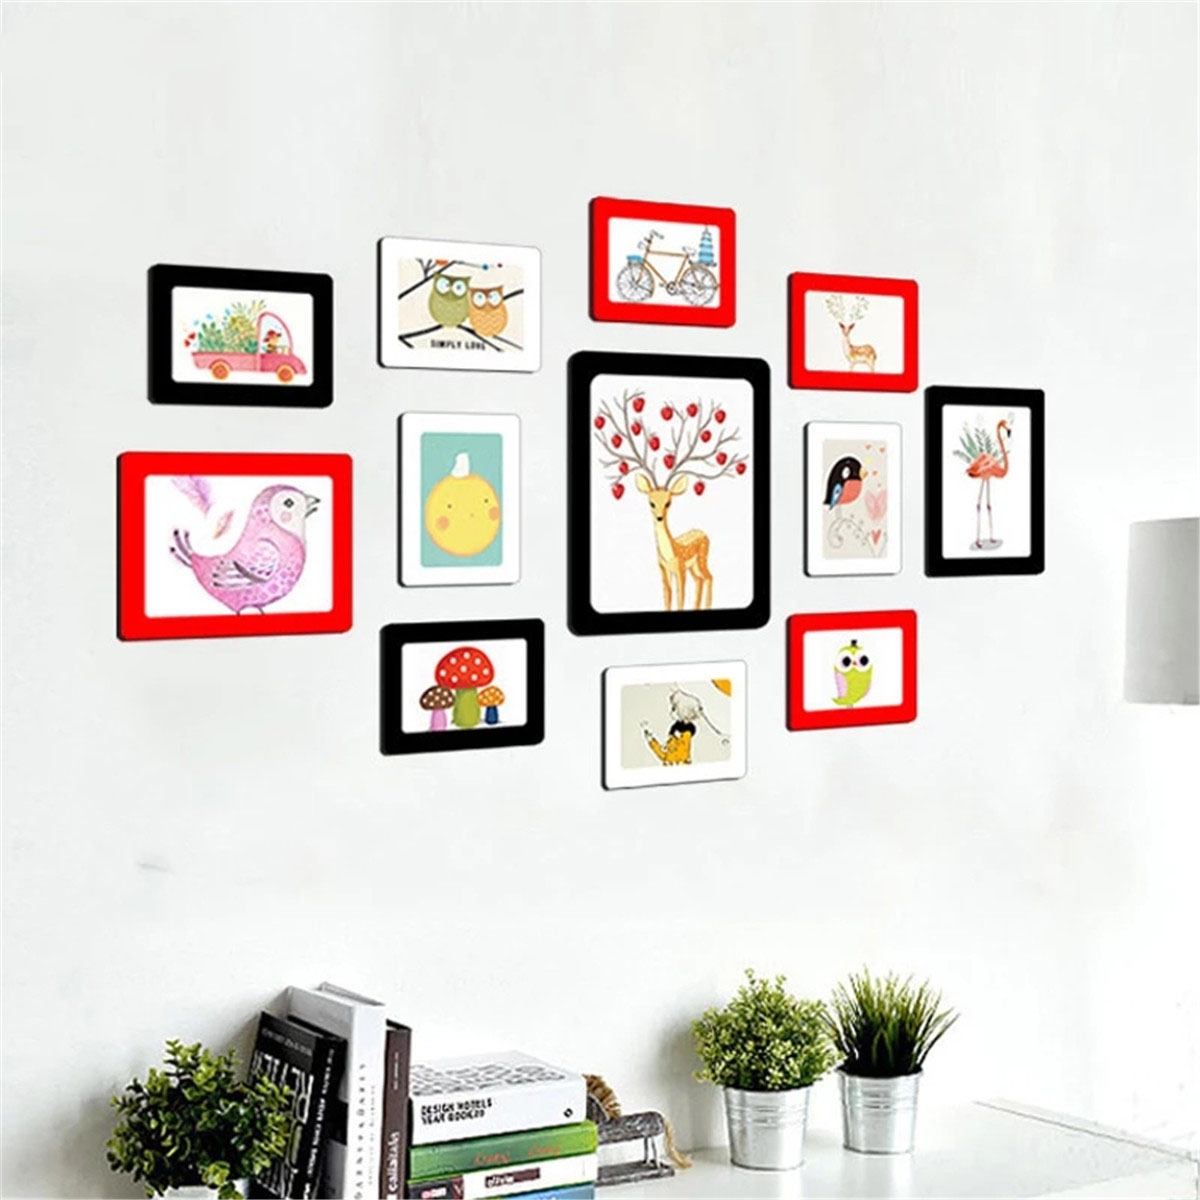 DIY-Colorful-Magnetic-Photo-Picture-Frames-Fridge-Refrigerator-Magnet-Photo-Frame-For-Wall-Living-Ro-1787813-2